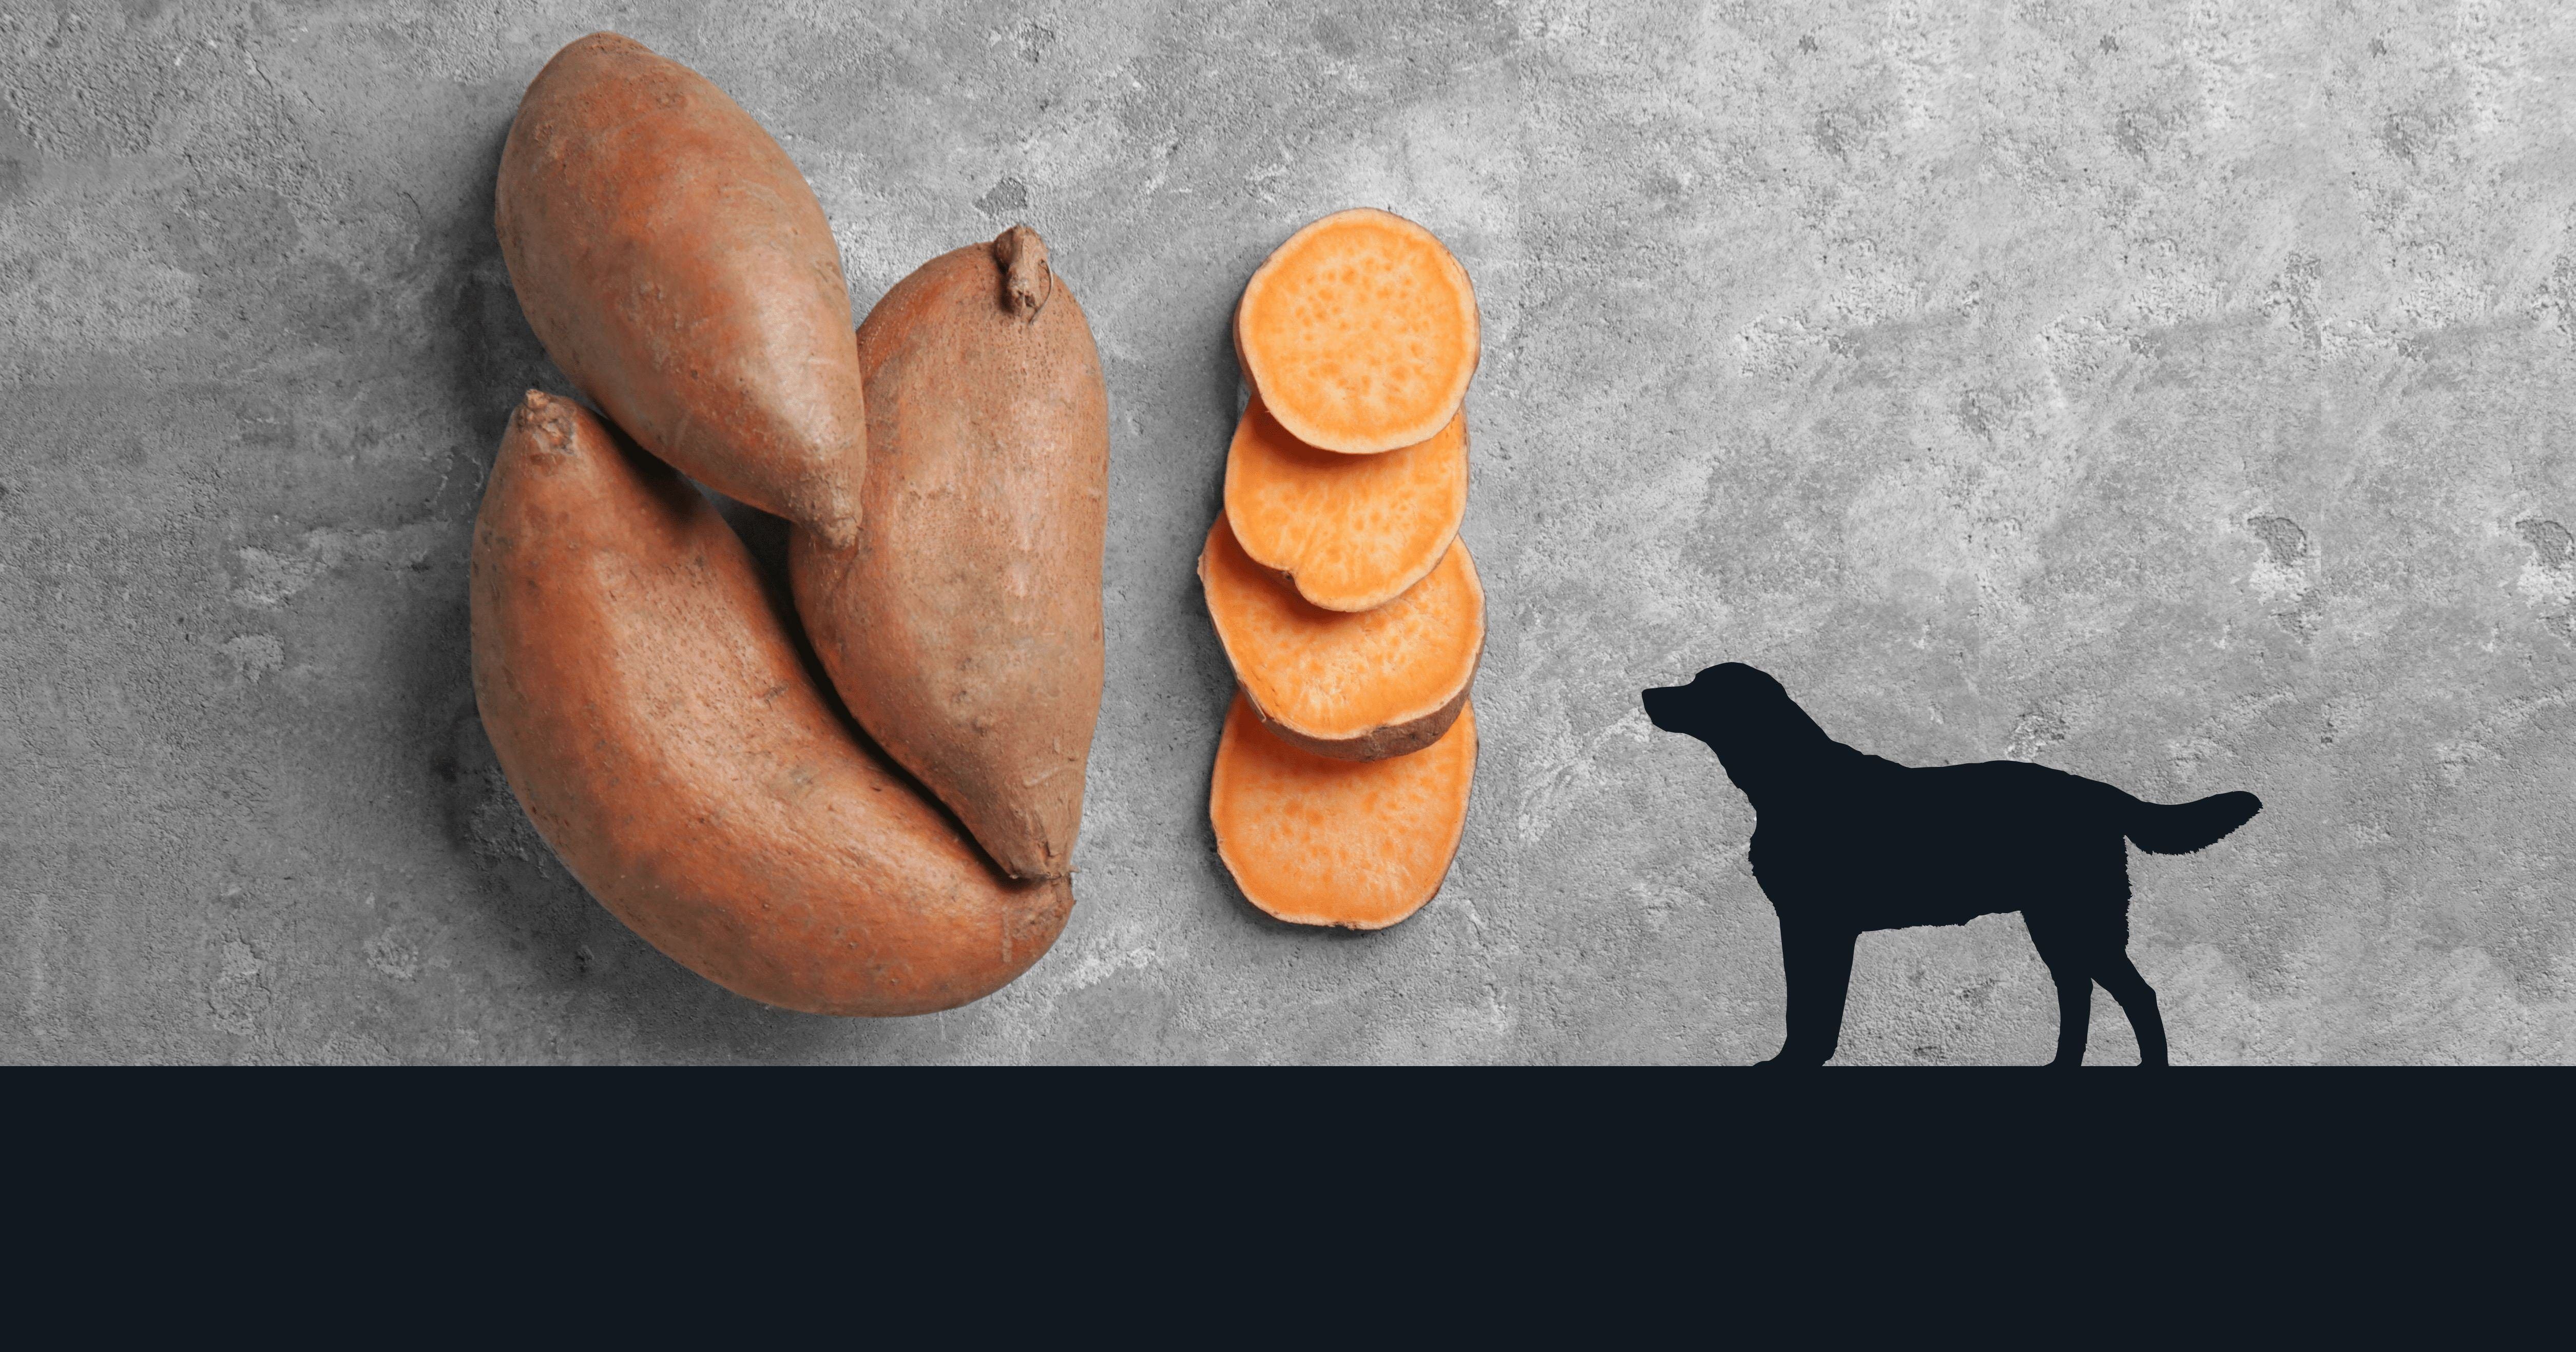 can toy poodle eat sweet potato?